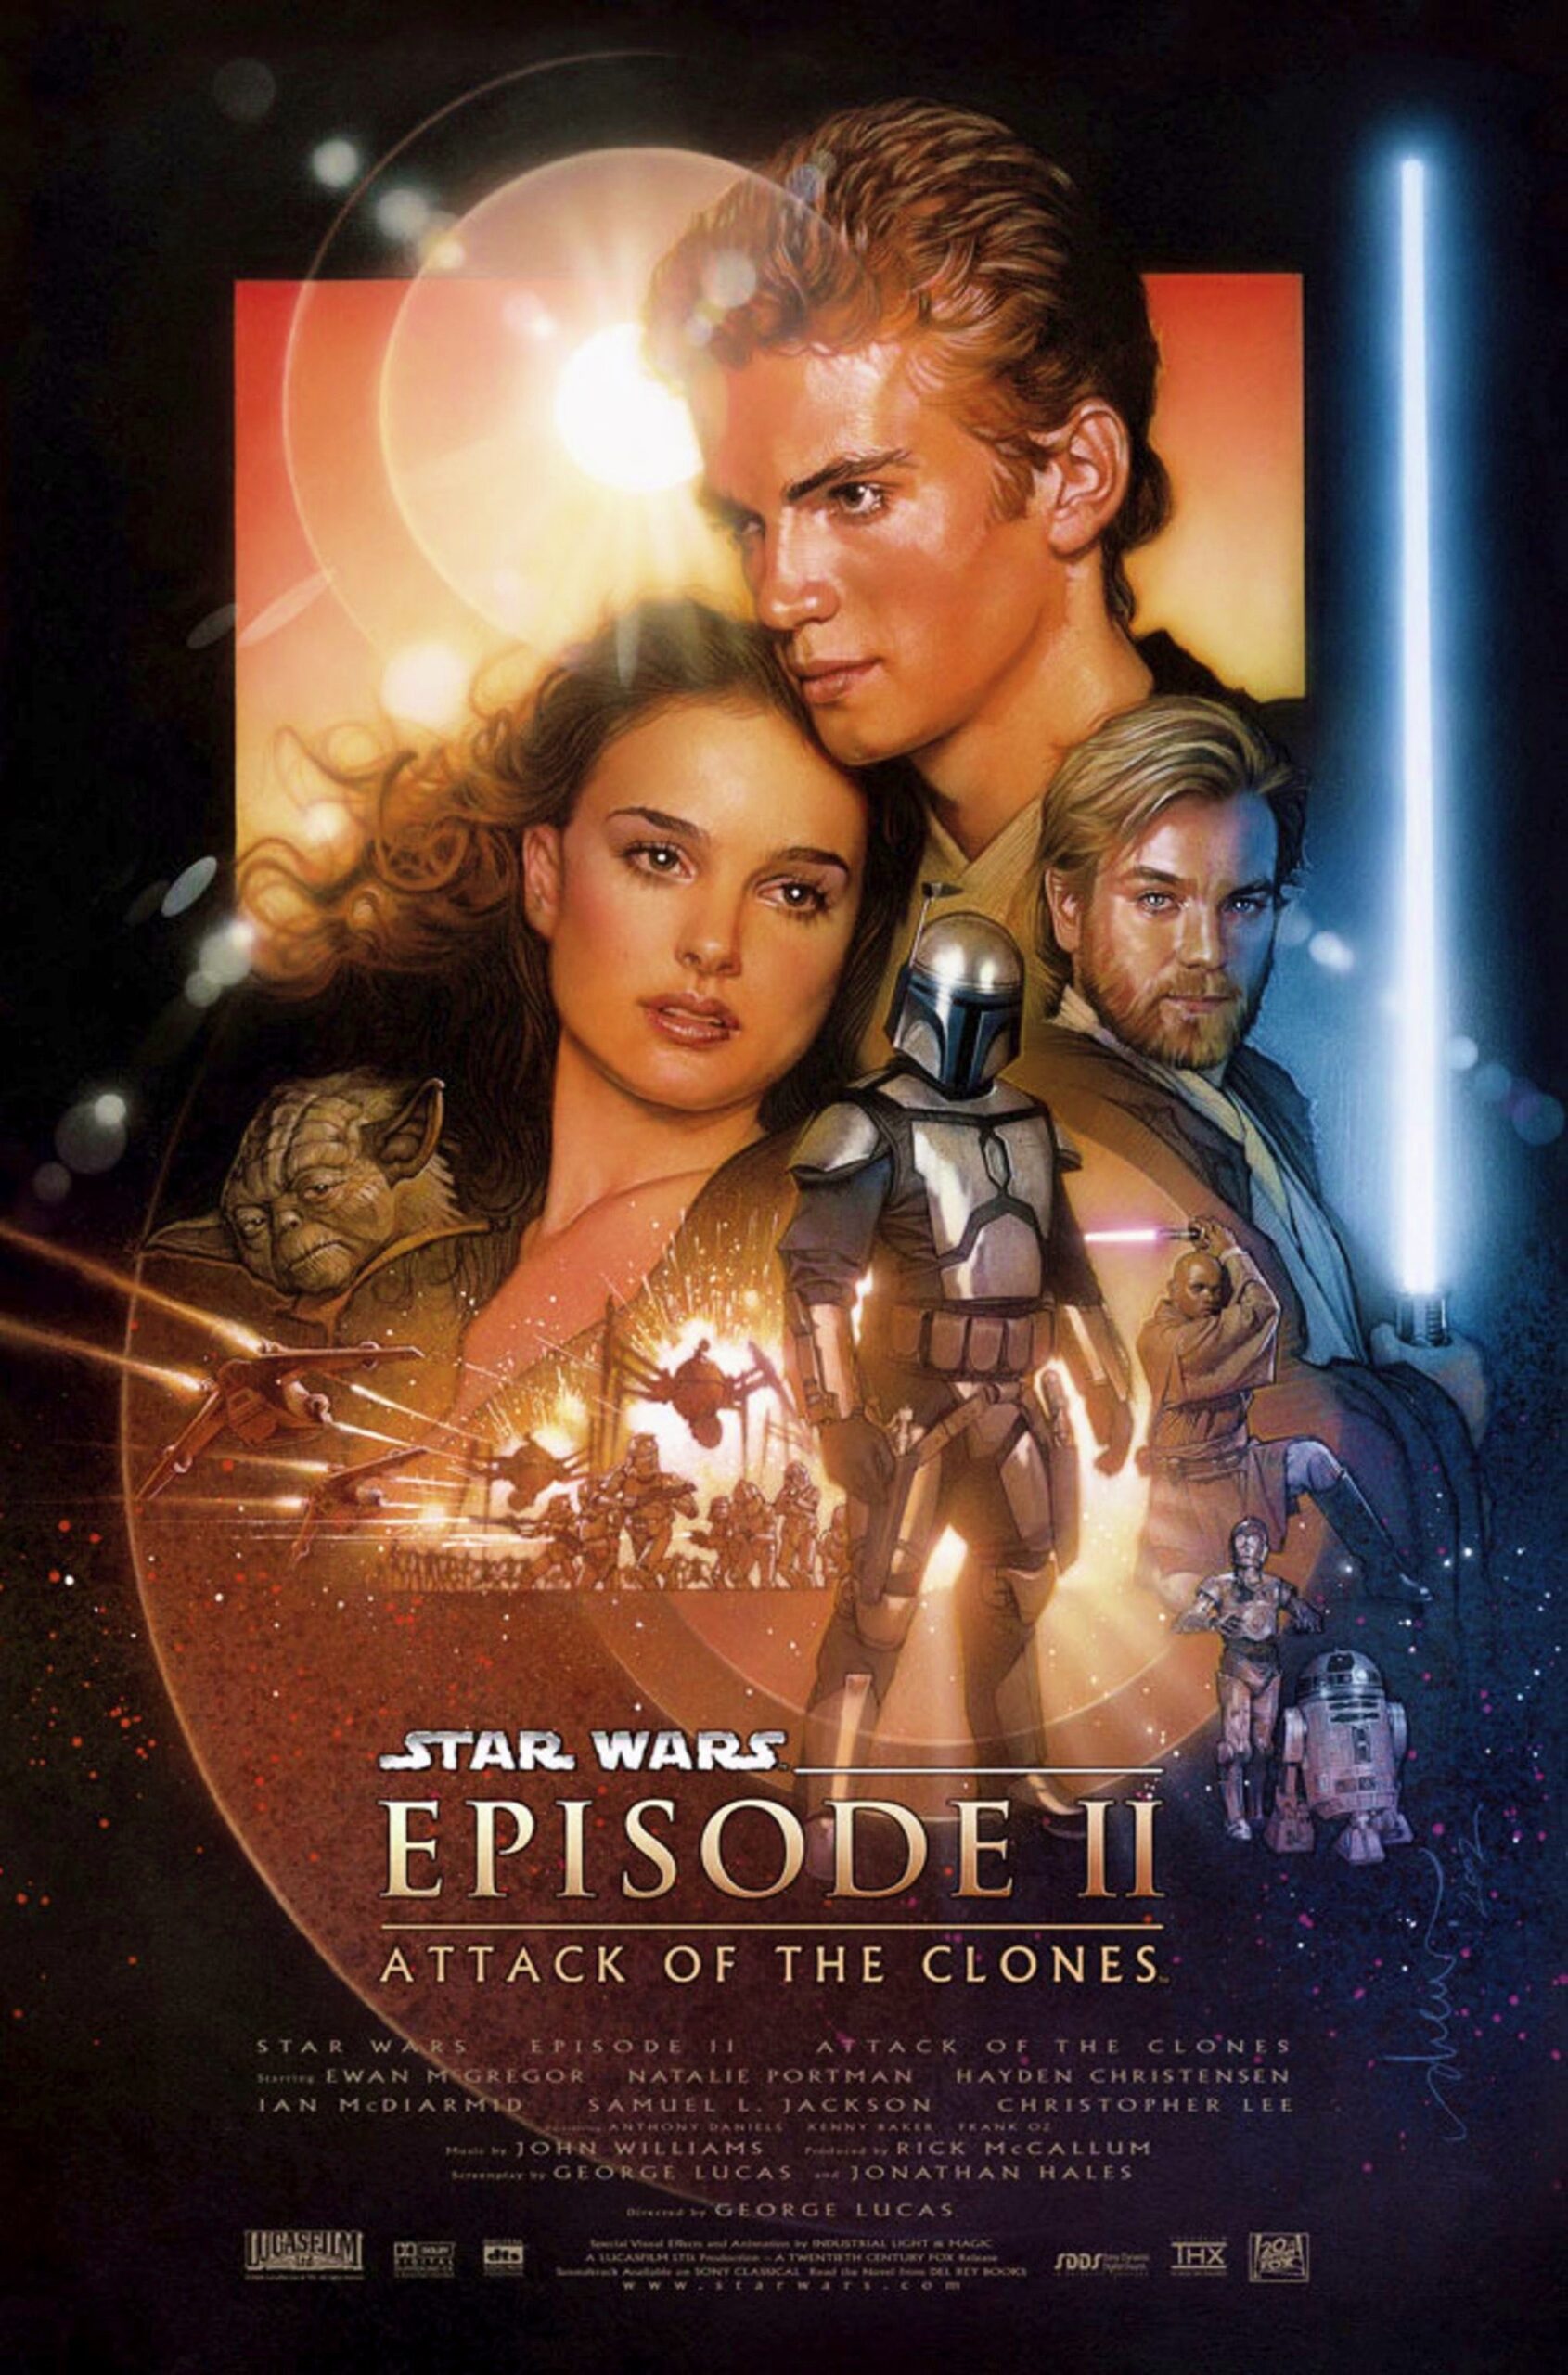 Star Wars Attack of the Clones